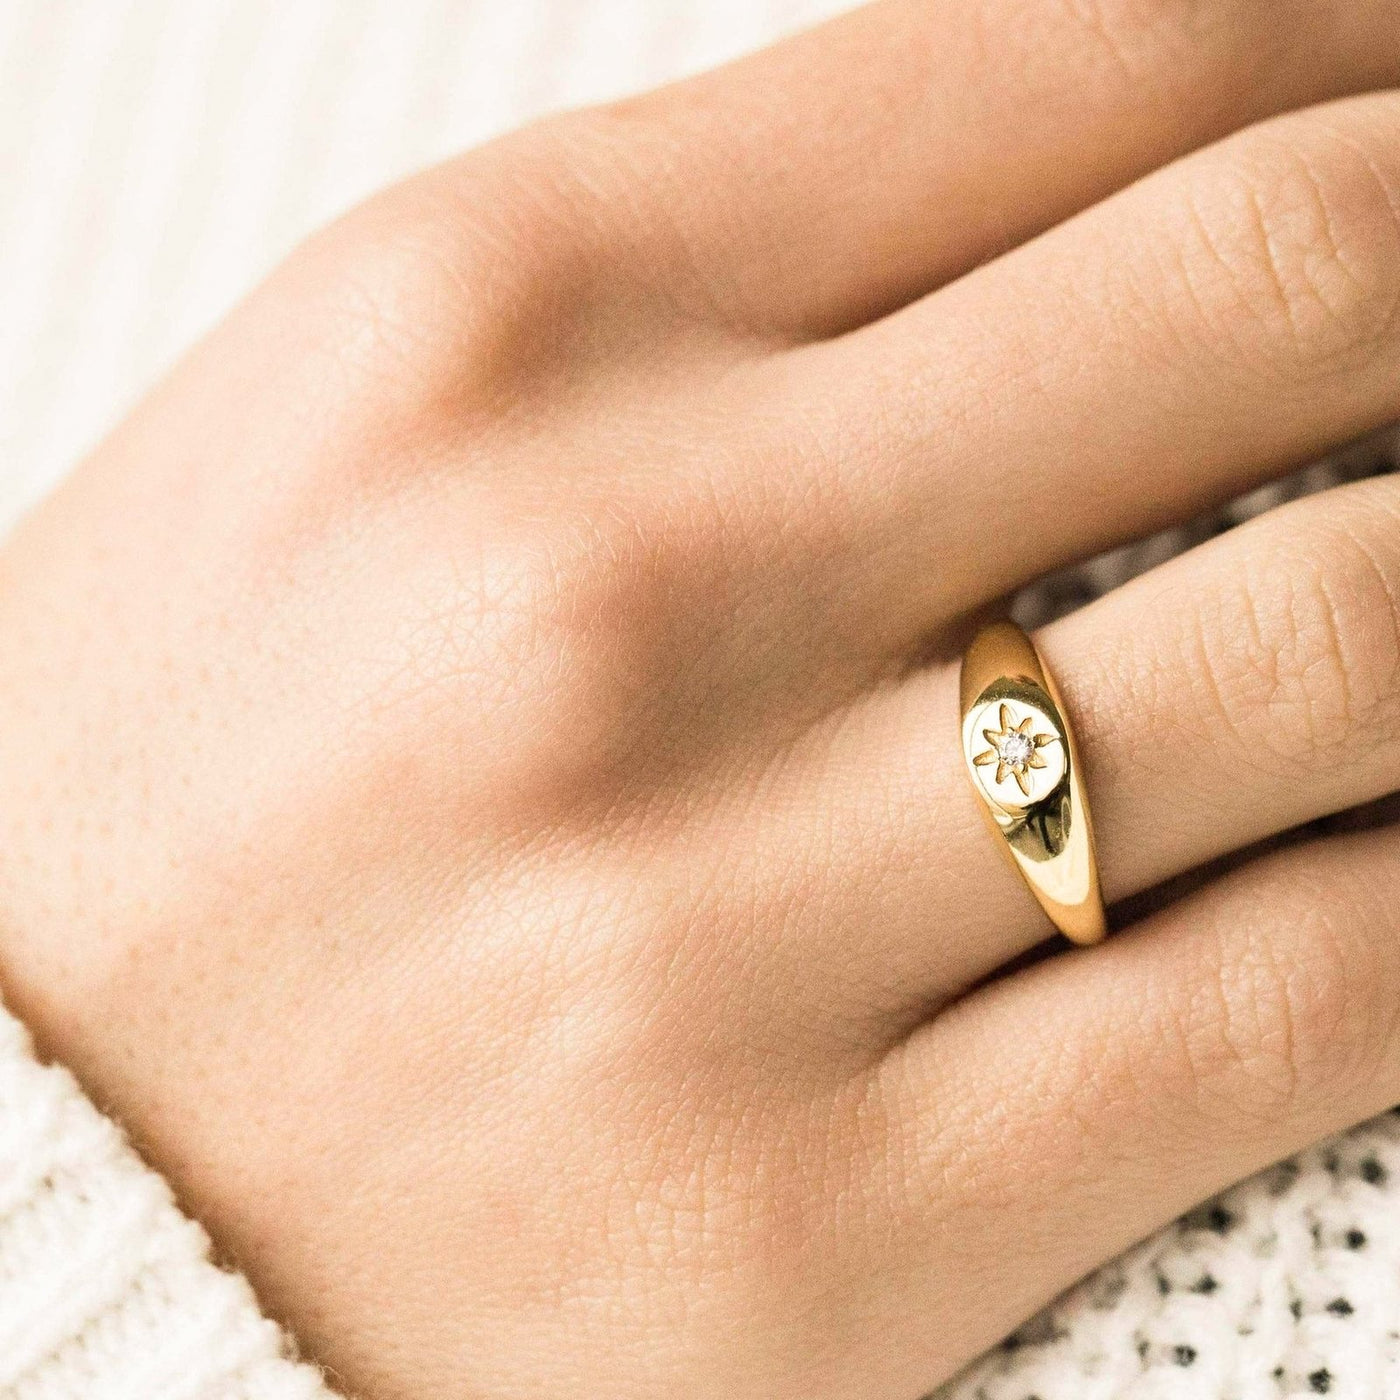 Starburst Signet Ring by Simple & Dainty Jewelry